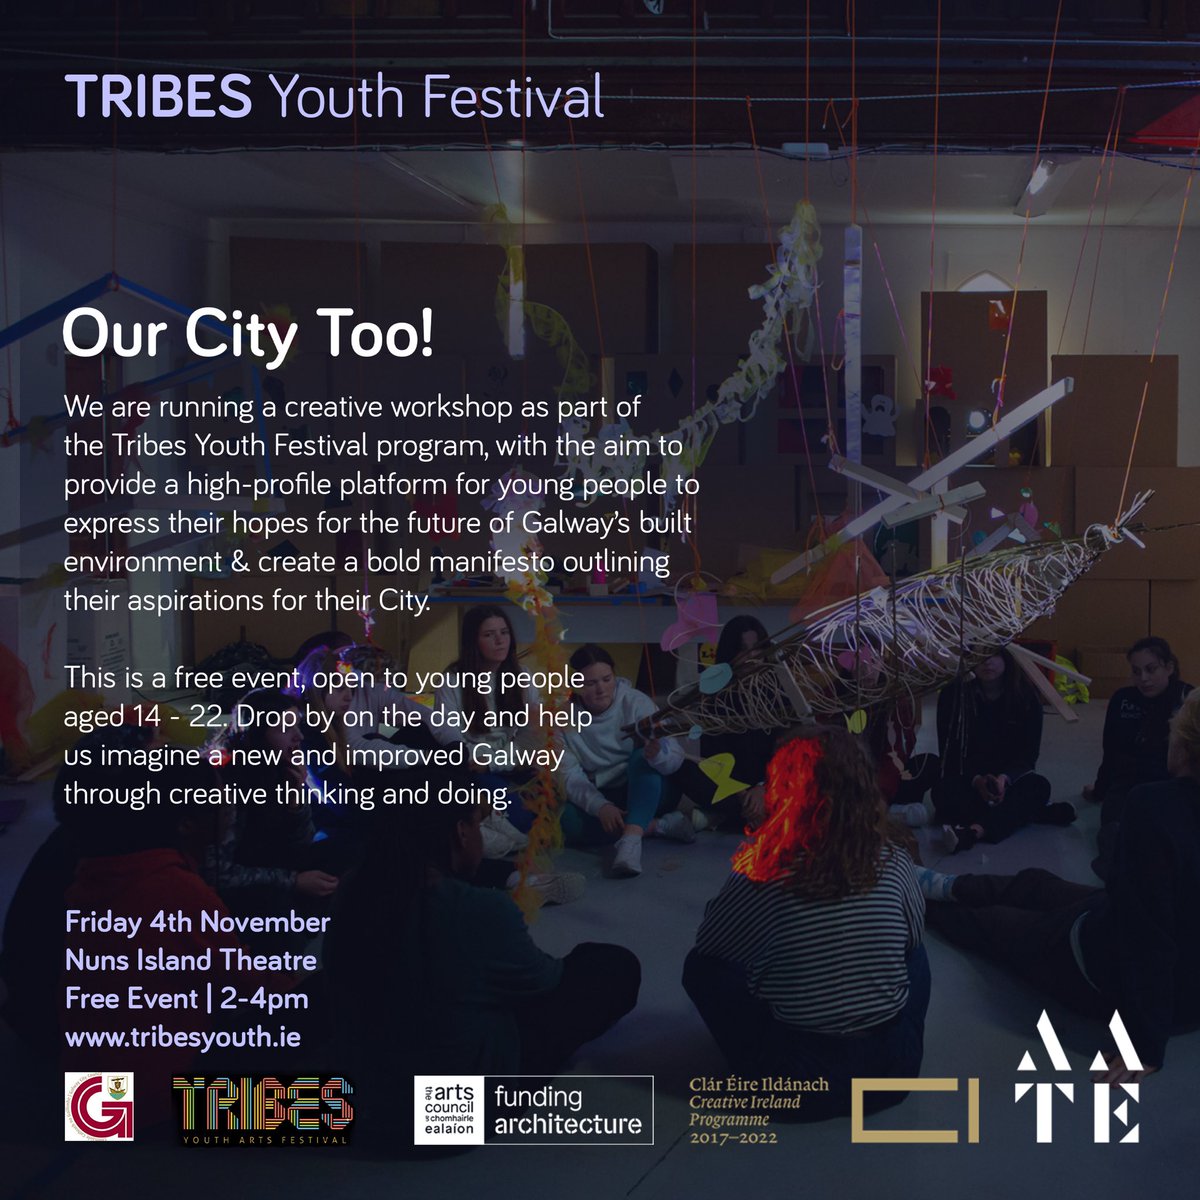 We are running workshop as part of the Tribes Youth Festival, with the aim to provide a high-profile platform for young people to express their hopes for the future of Galway’s built environment & create a bold manifesto outlining their aspirations for their City.